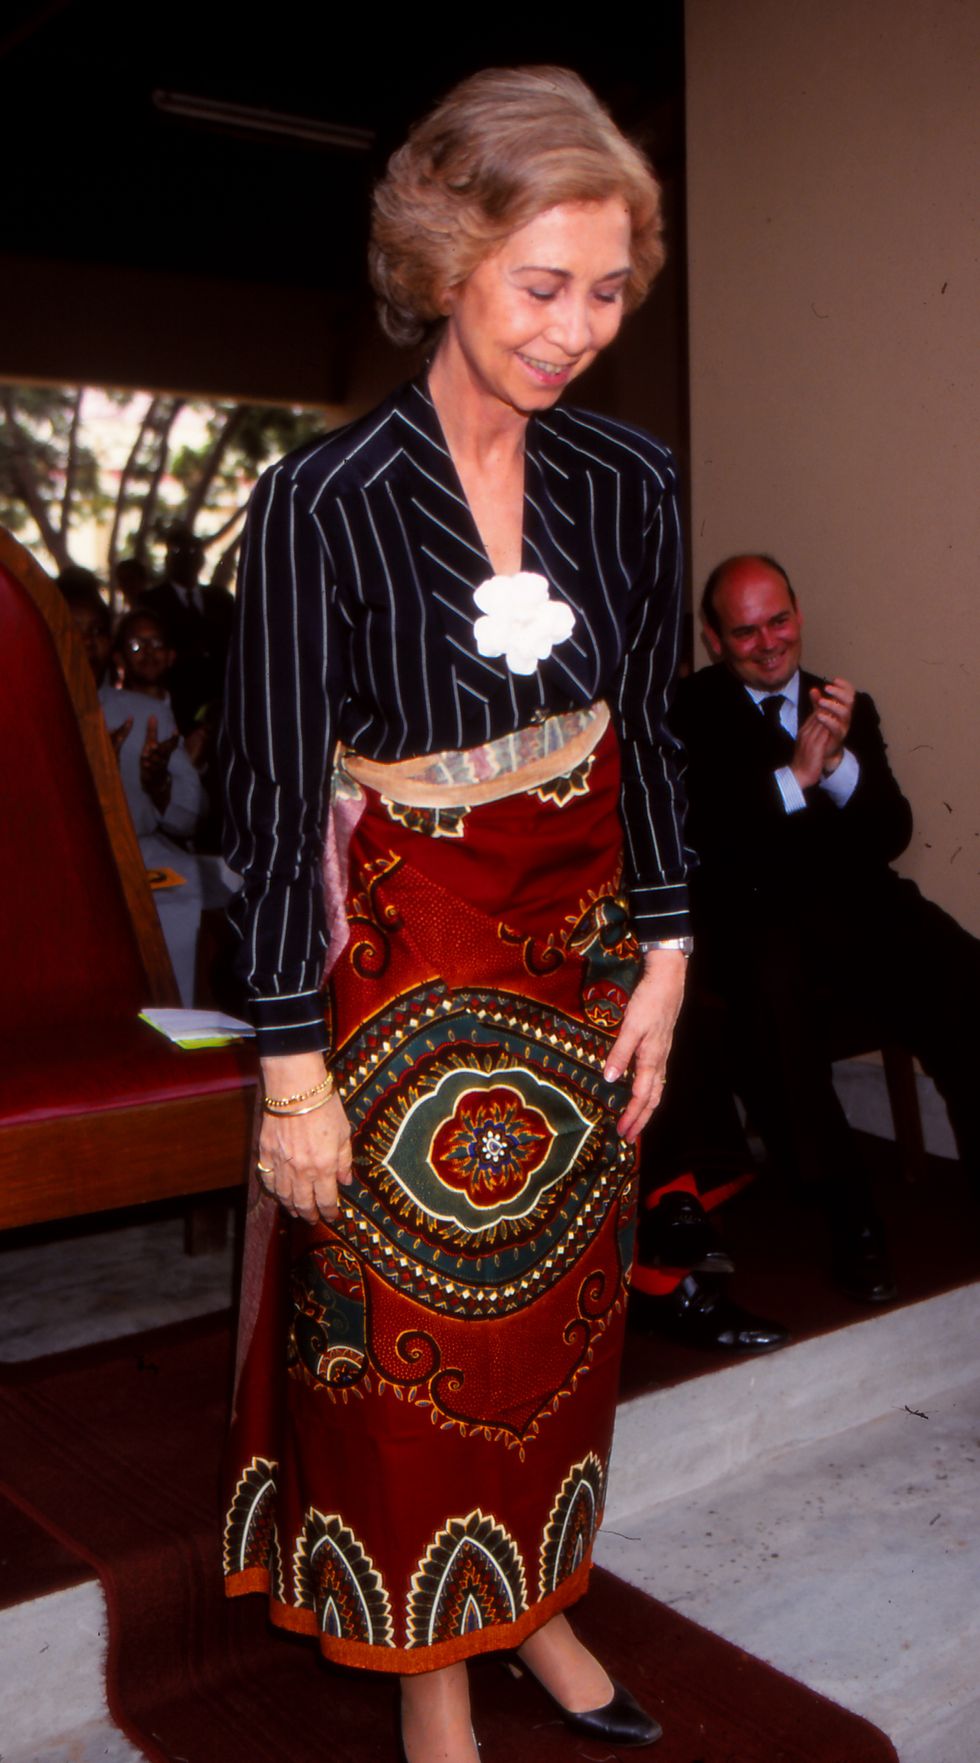 A typical skirt fot the Queen Sofia